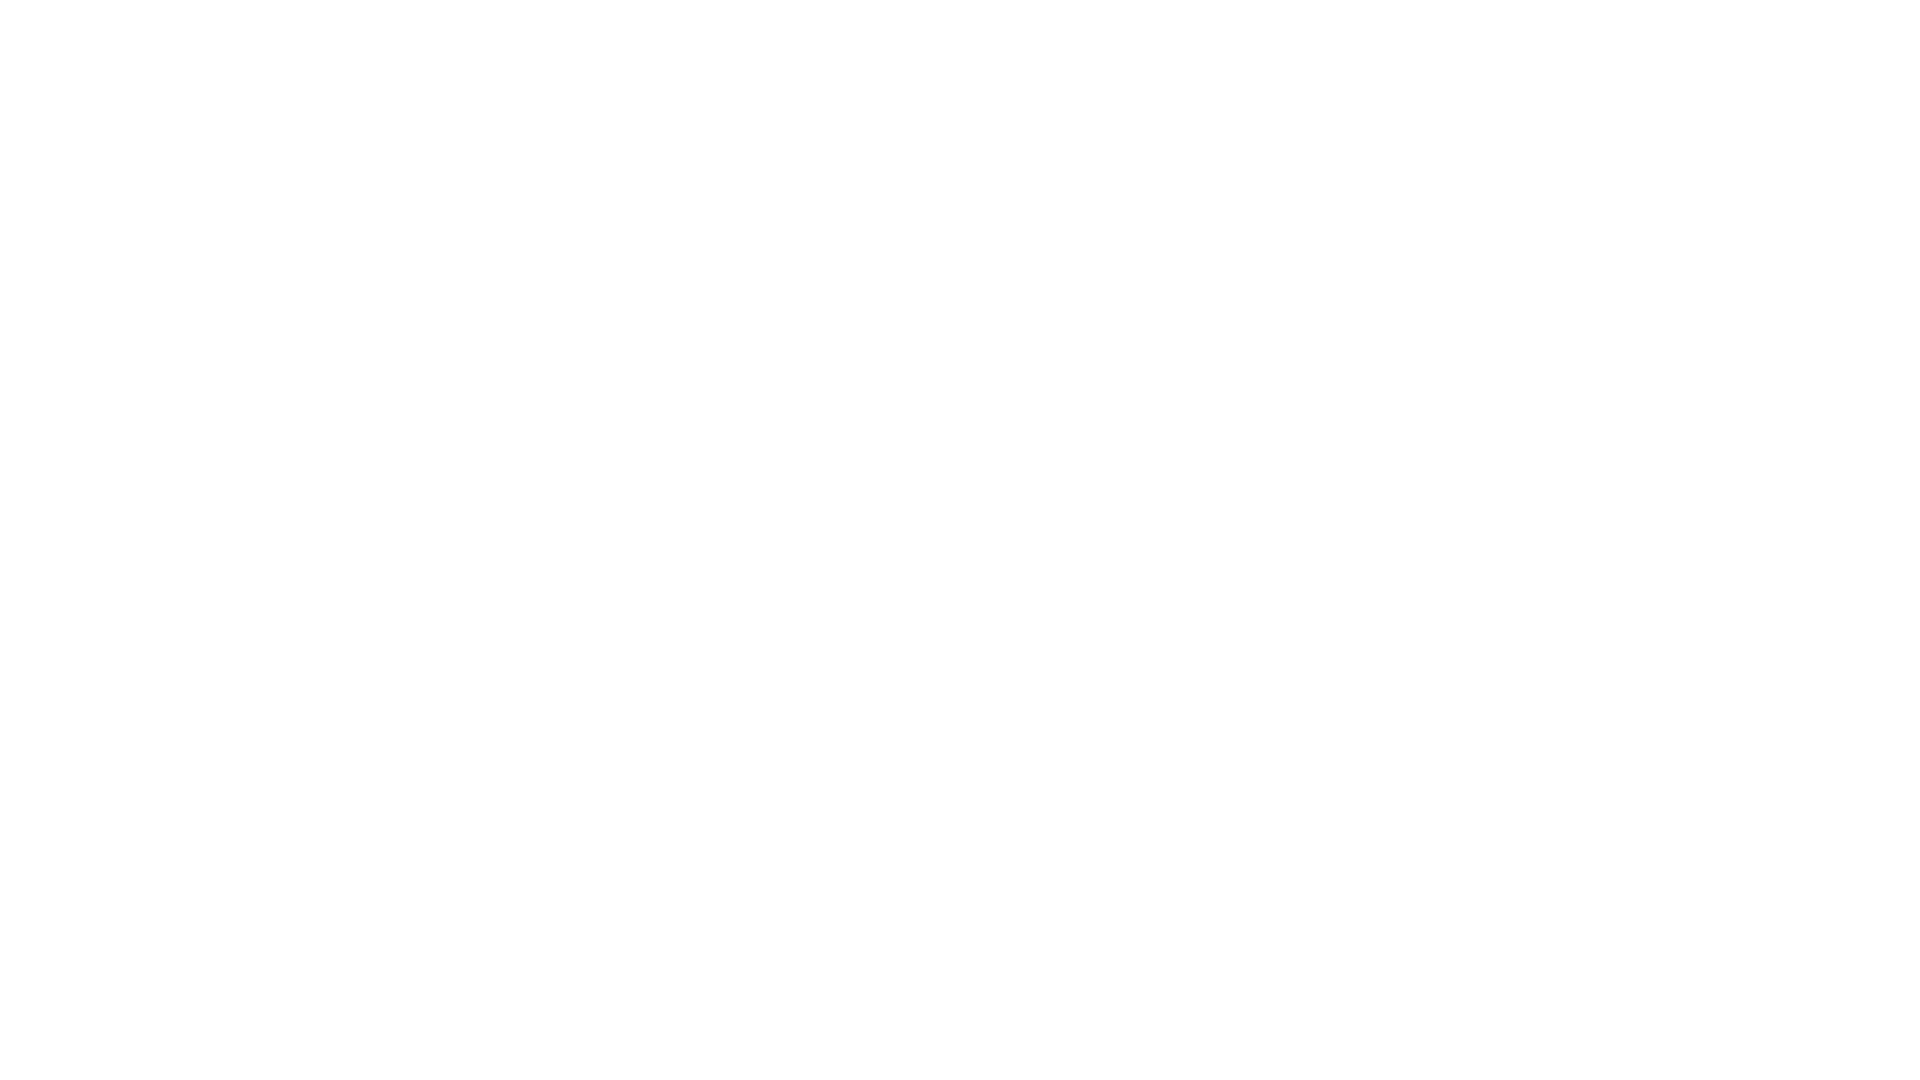 Please don't explode !